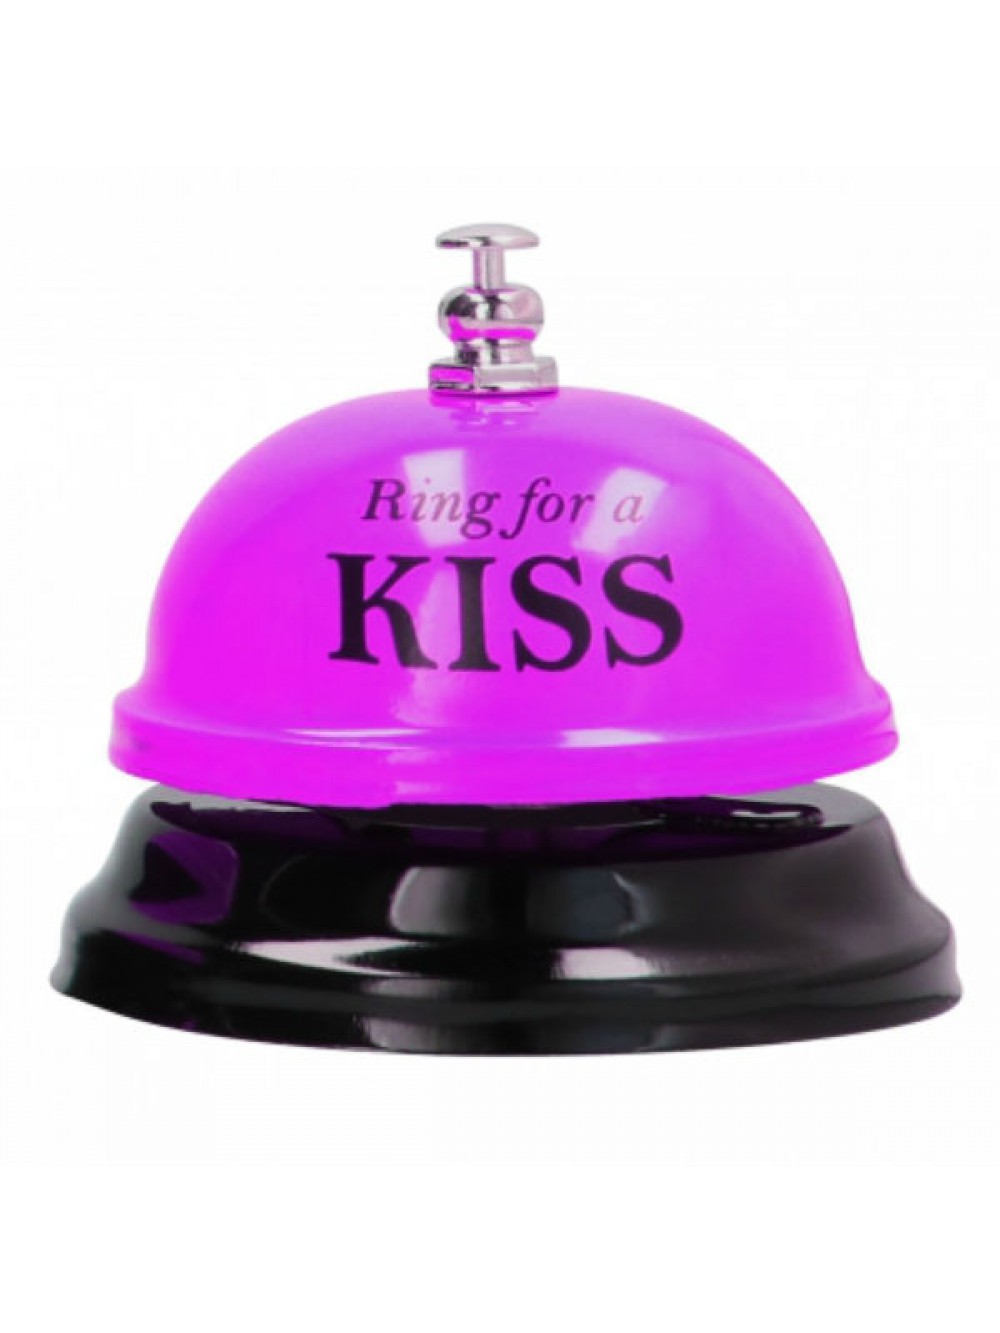 RING FOR A KISS HOTEL BELL PURPLE 8714273939975